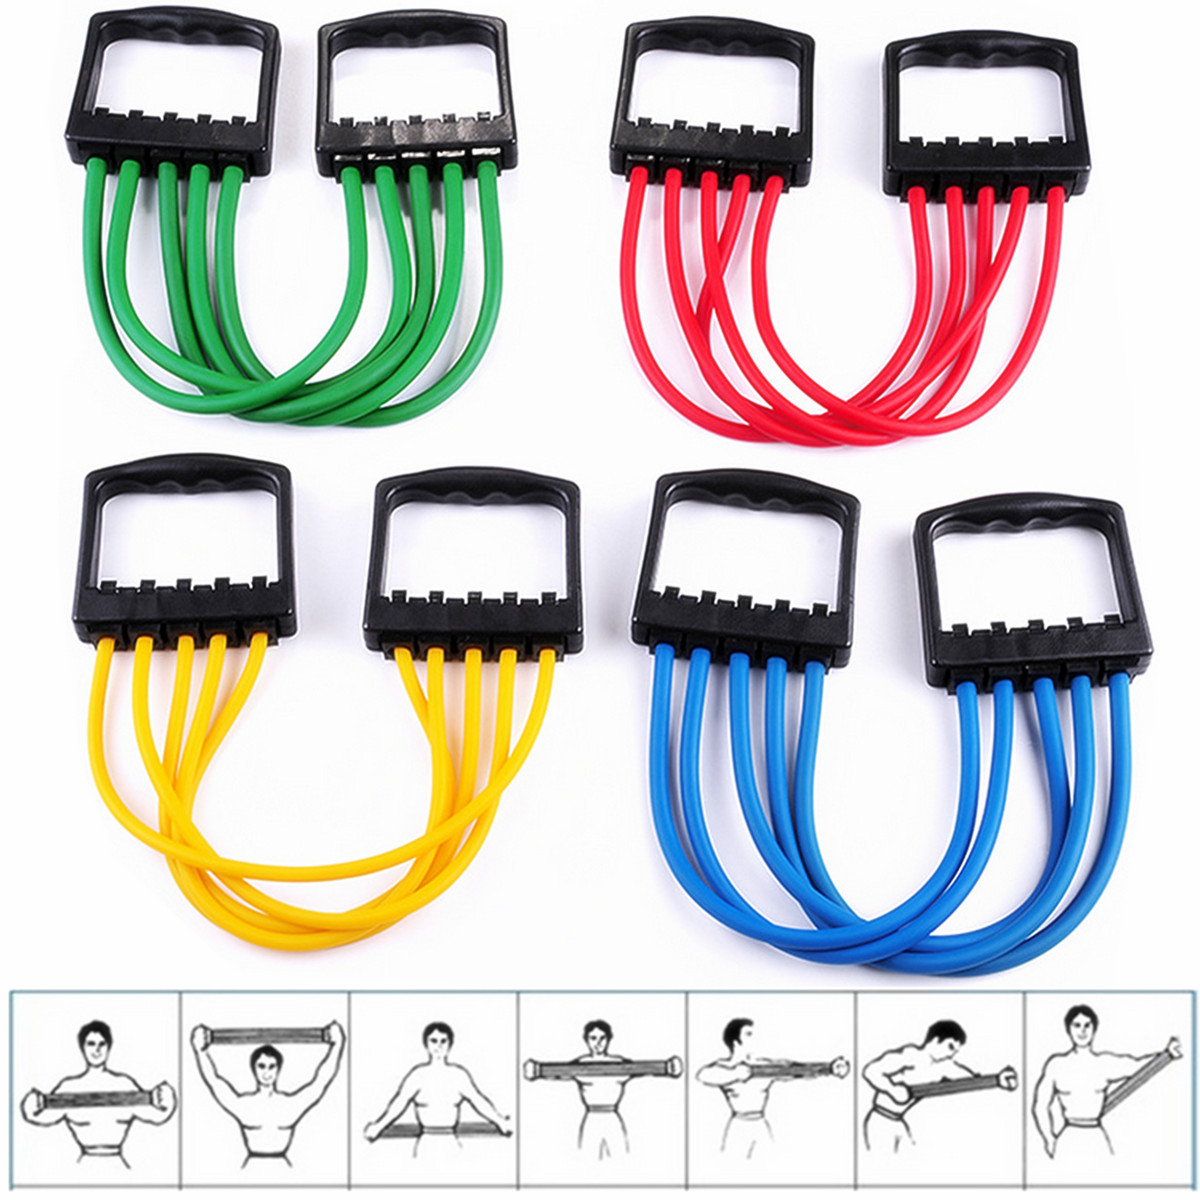 5-Spring Rubber Chest Expander Resistance Band Stretch Muscle Training Exercise 